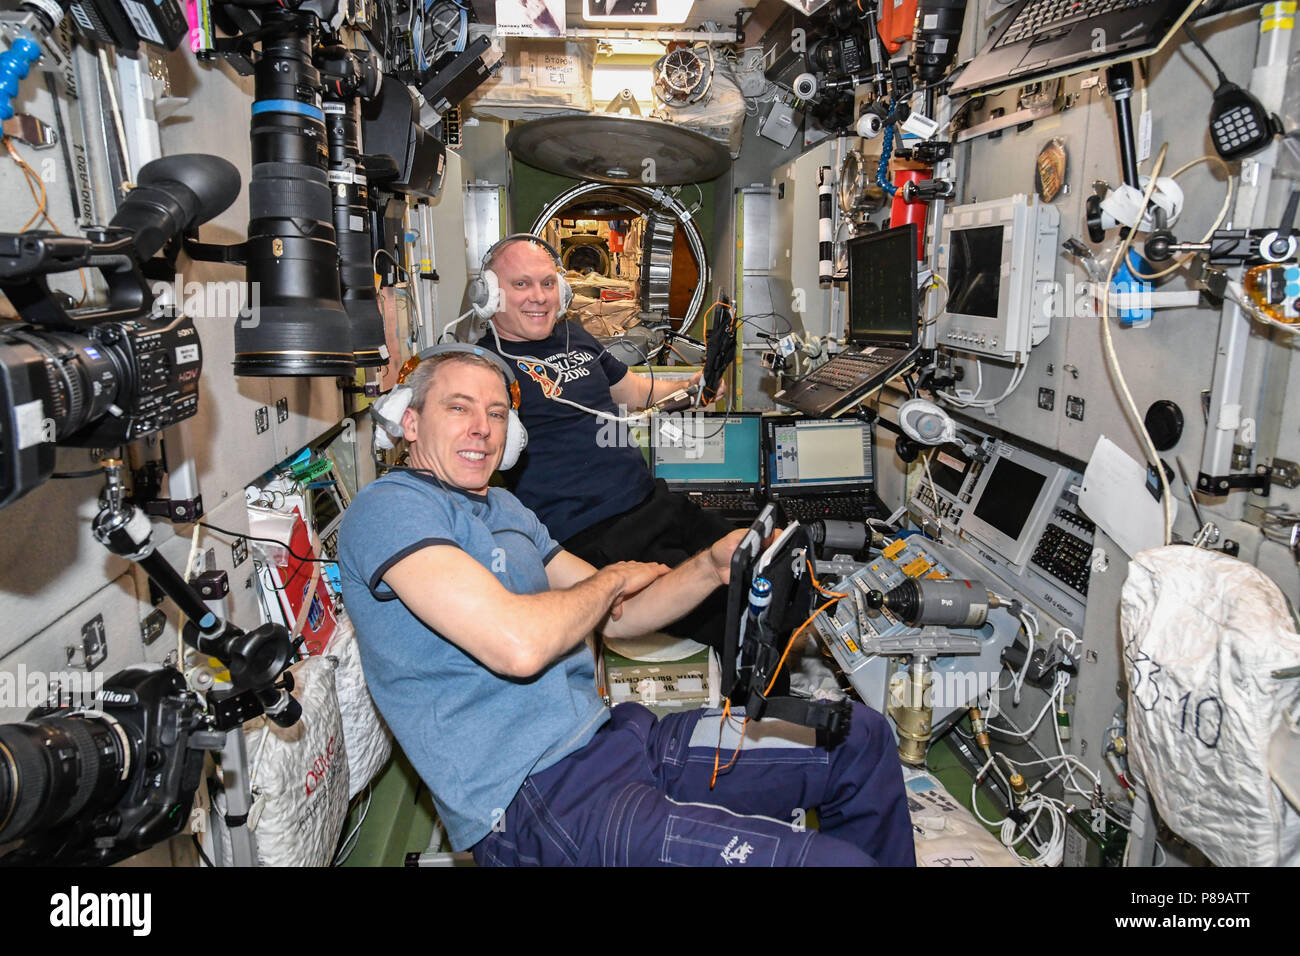 NASA astronaut Drew Feustel, foreground, and Russian cosmonaut Oleg Artemyev practice evacuation procedures inside the Zvzeda service module of the International Space Station in the unlikely event an emergency would require the crew to enter their Soyuz spacecraft and return to Earth June 20, 2018 in Earth Orbit. Stock Photo